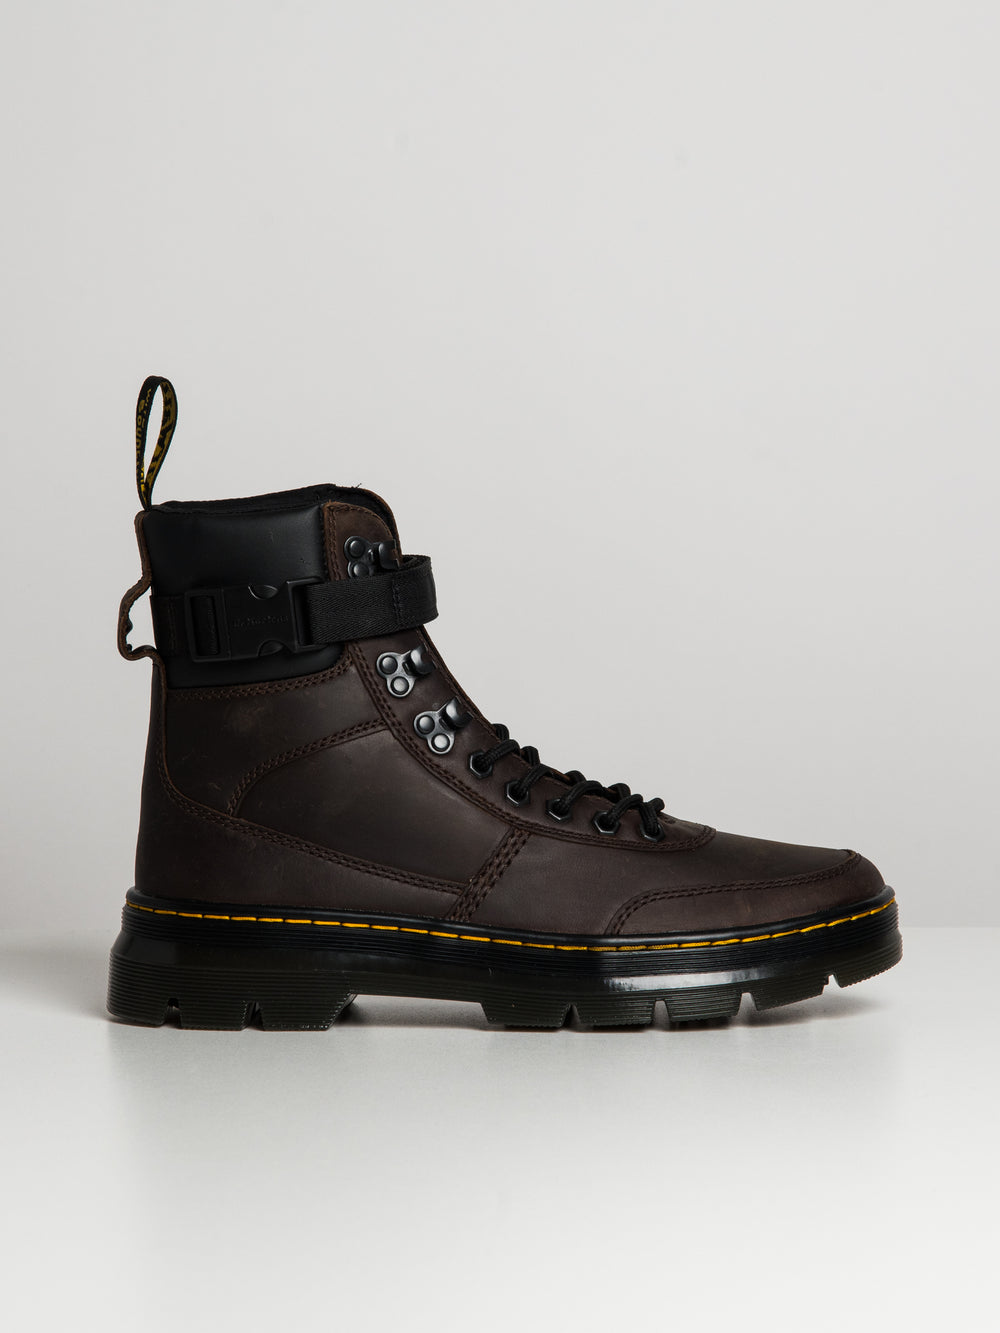 DR MARTENS COMBS TECH LEATHER CRAZY HORSE BOOTS - CLEARANCE